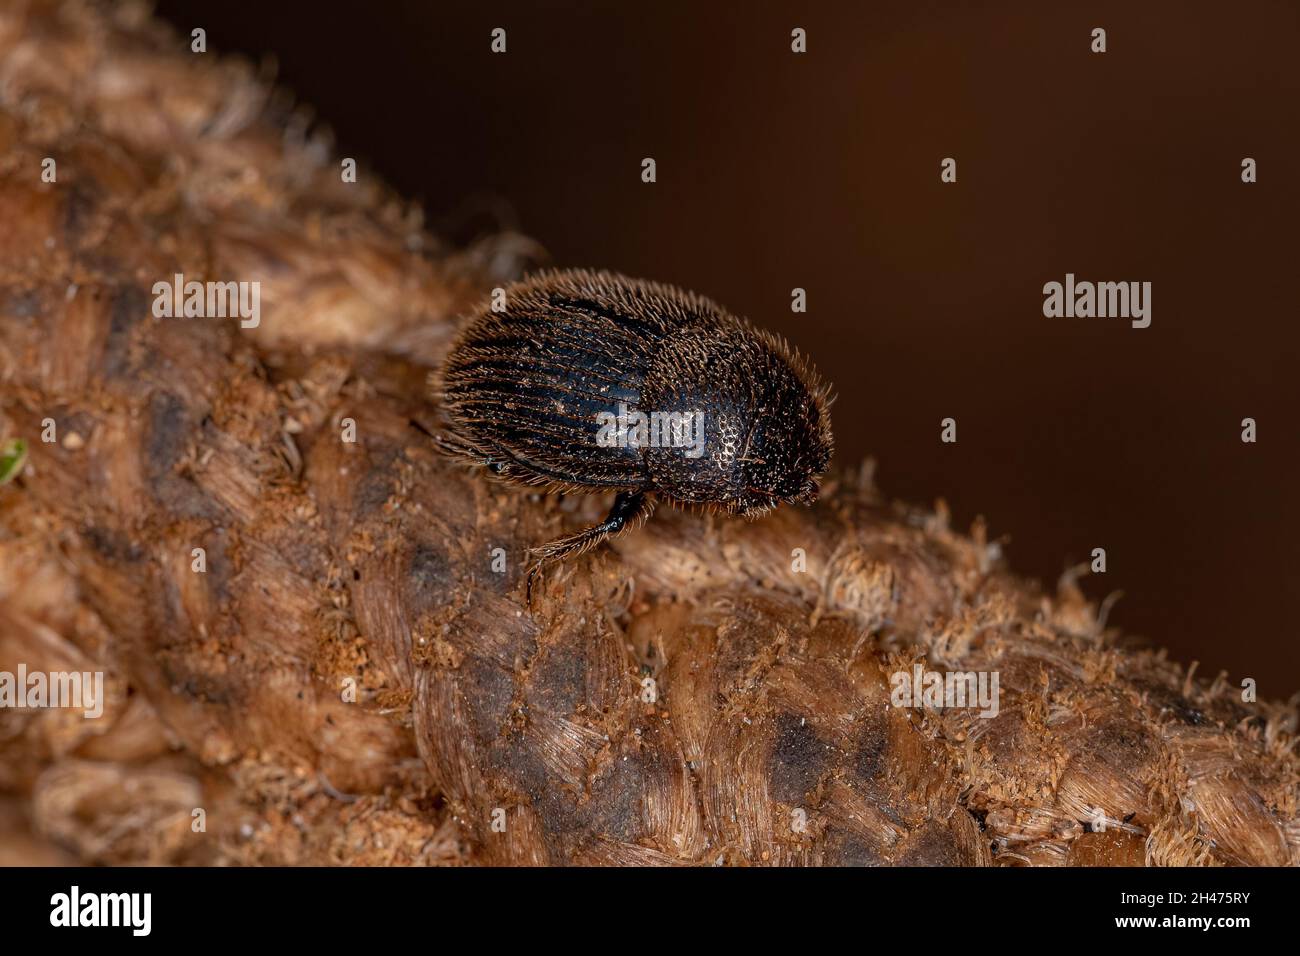 Adult Dung Beetle of the Subfamily Scarabaeinae Stock Photo